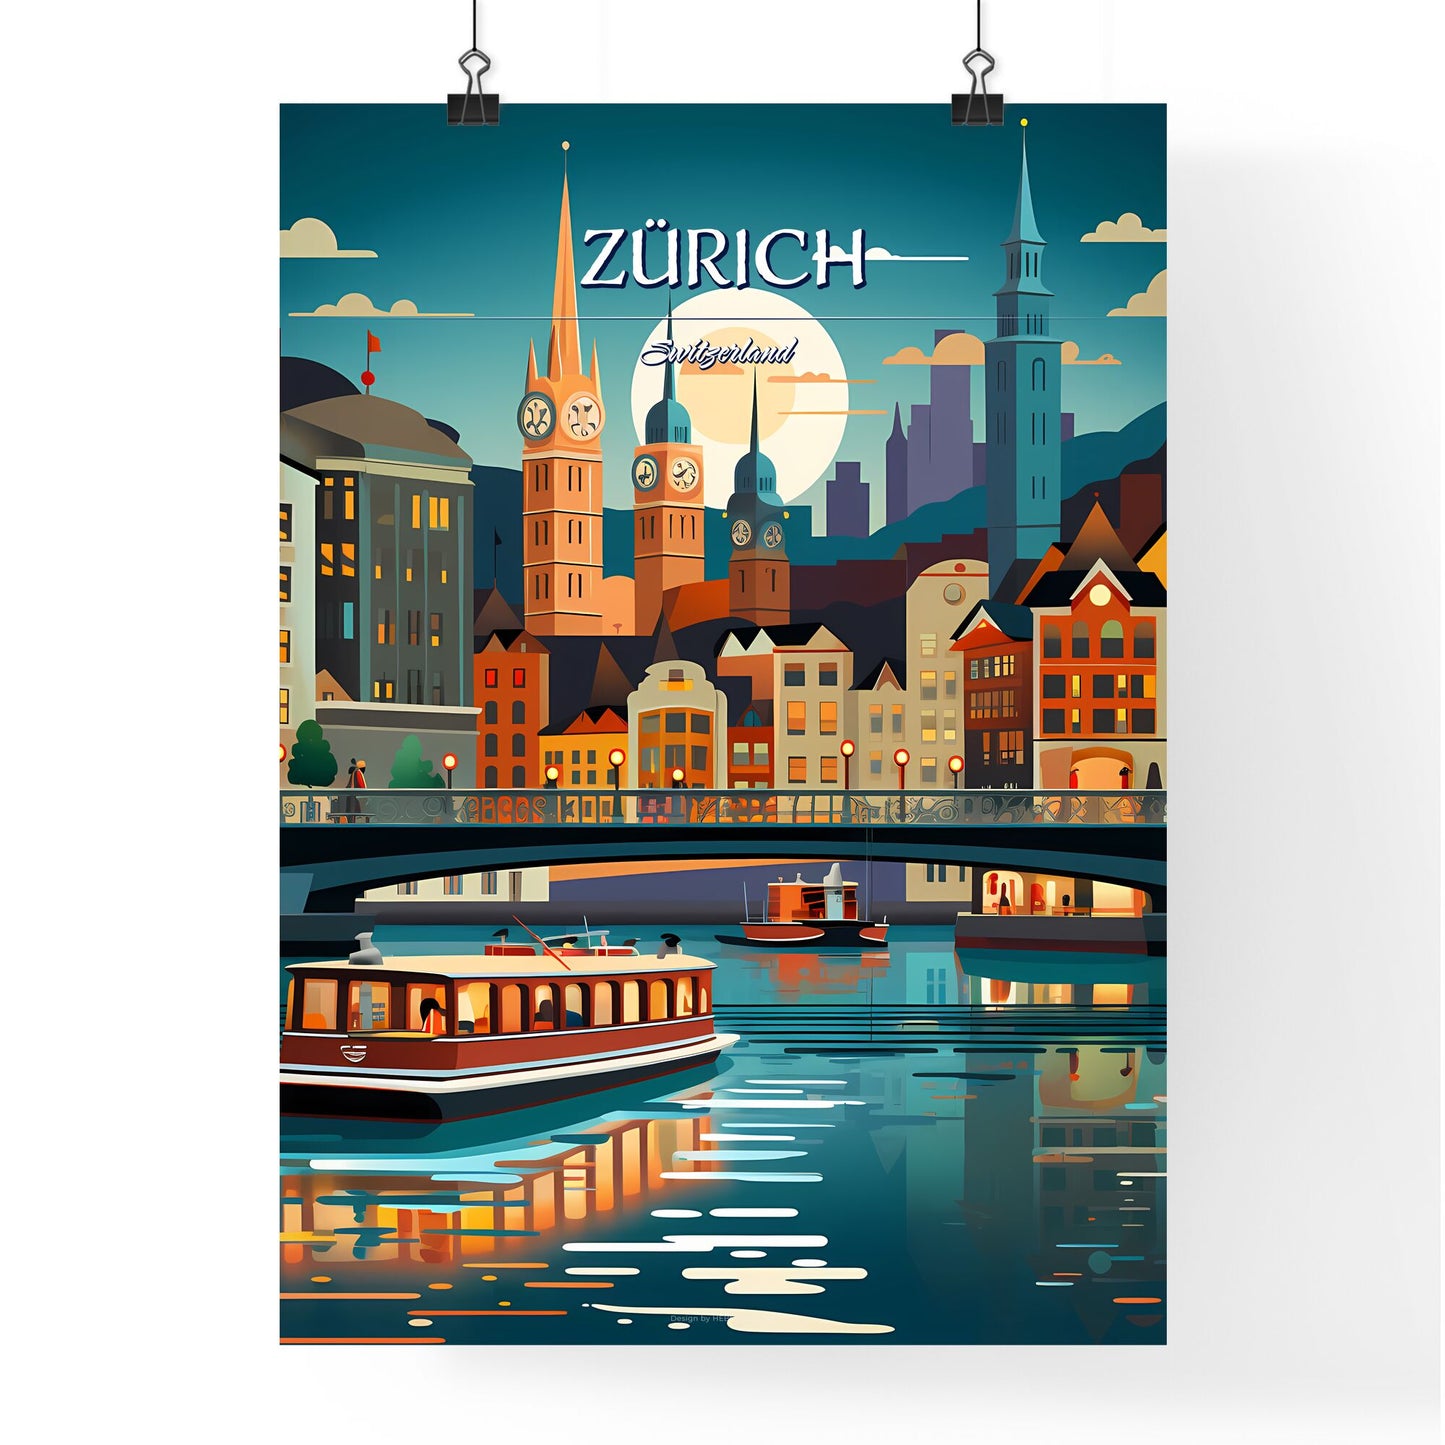 Zürich, Switzerland, - Art print of a city with boats on water Default Title